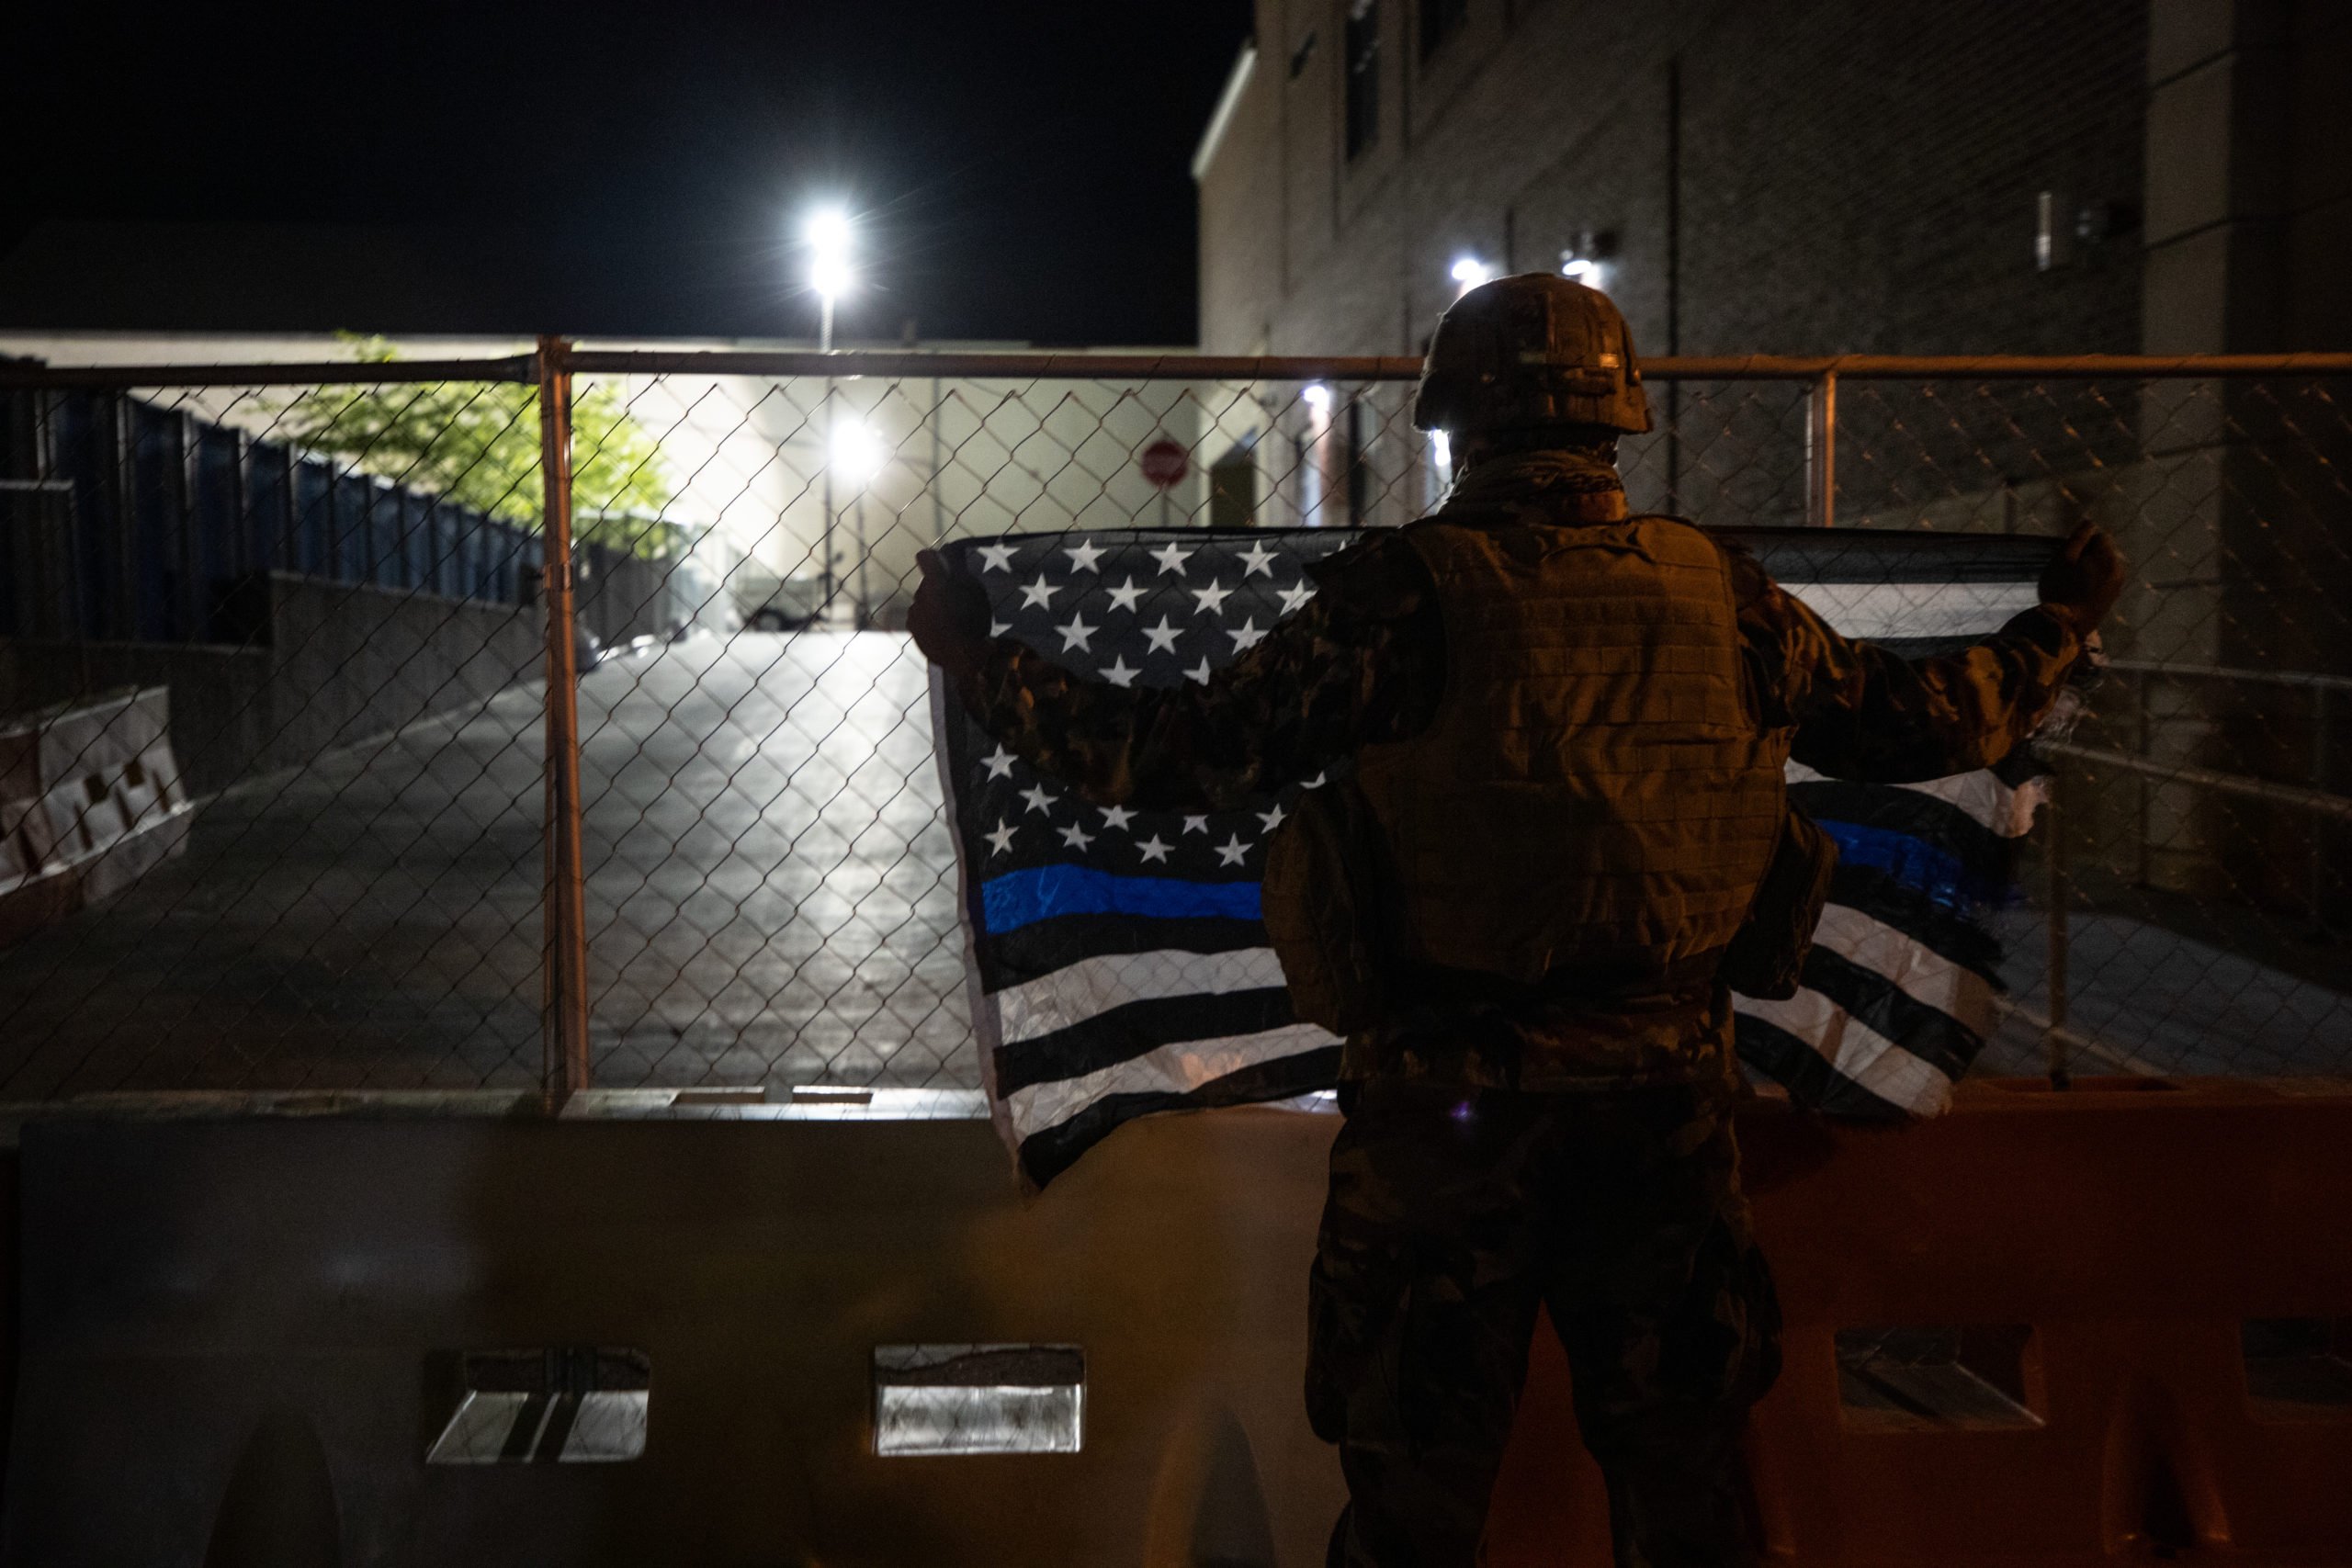 A man dressed in camouflage held a Thin Blue Line flag outside the Lancaster Bureau of Police Building, where officers were stationed. (Photo - Kaylee Greenlee / Daily Caller News Foundation)